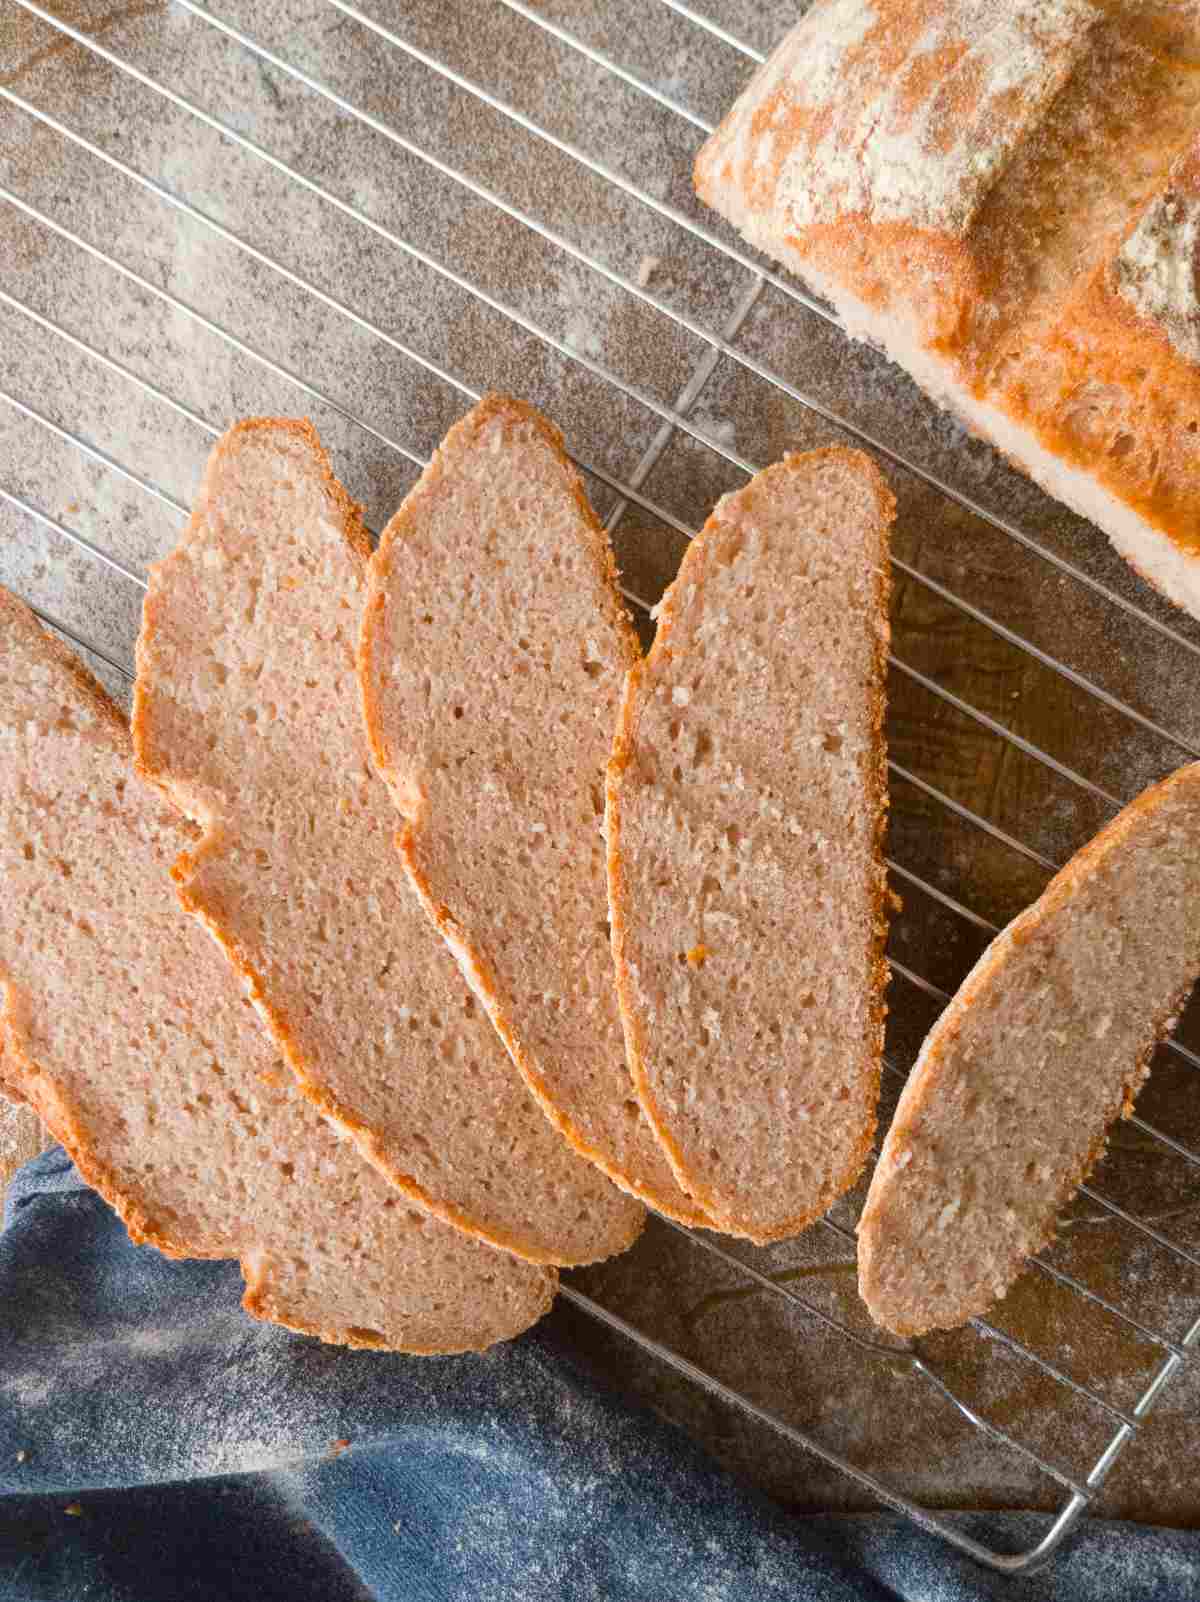 Gluten-free bread with psyllium husk sliced on a cooling rack.